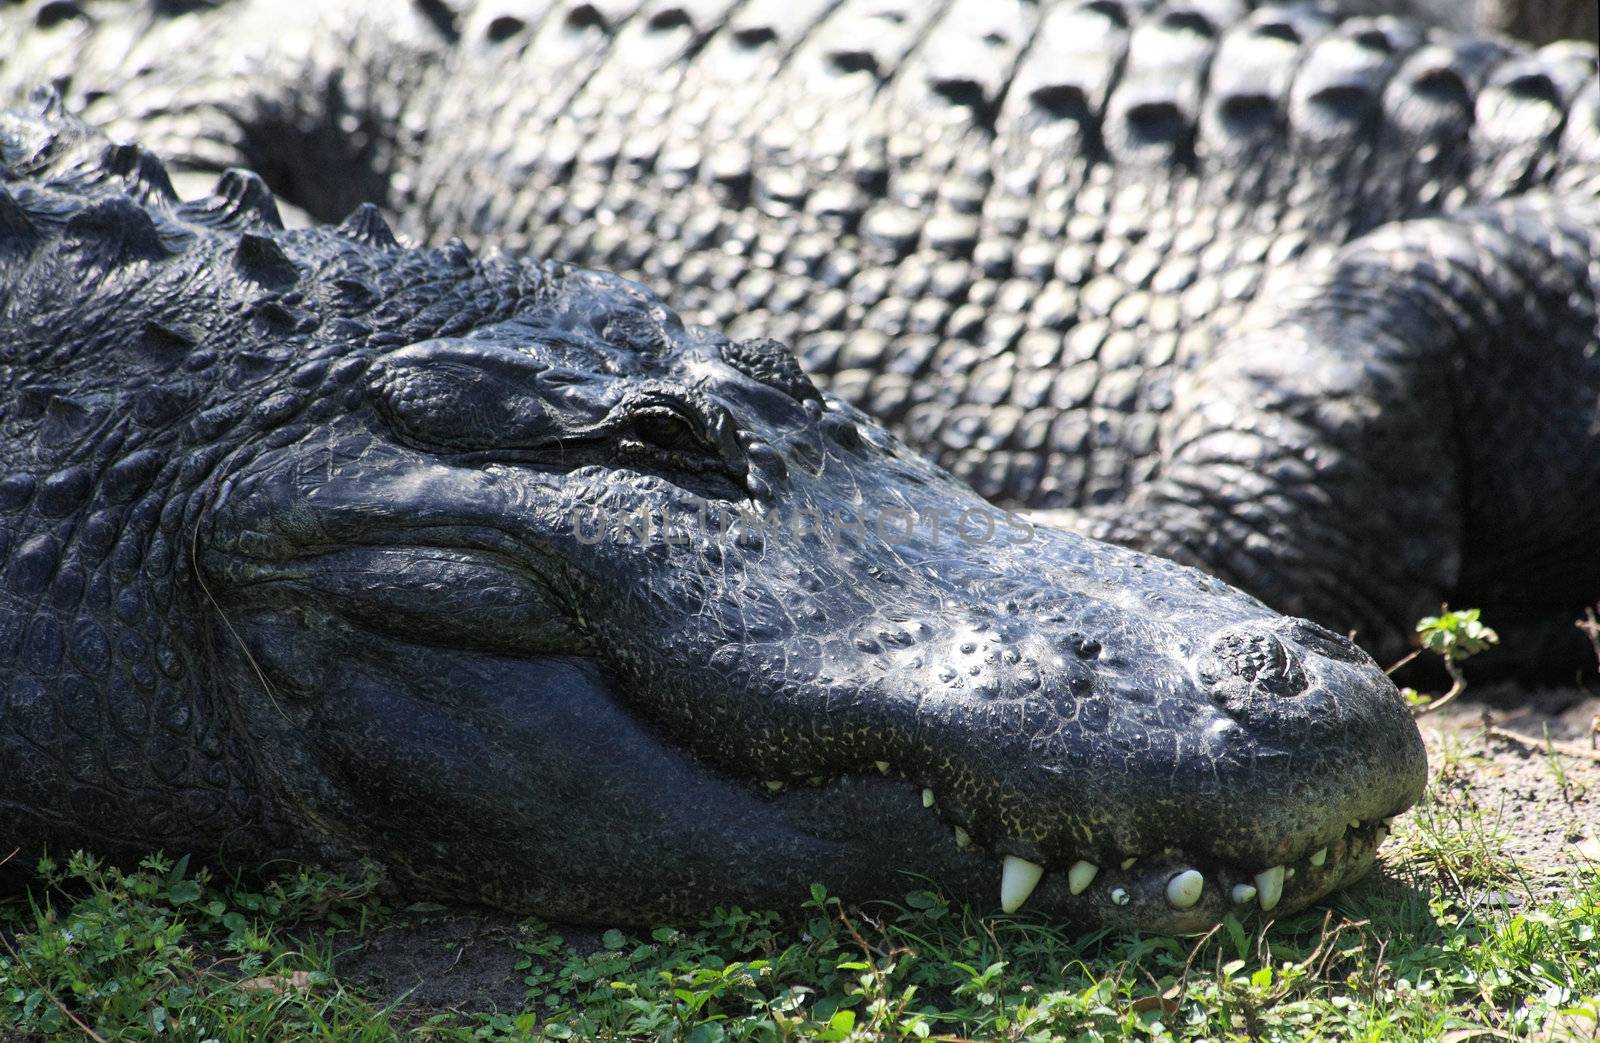 alligator in a park in Florida State  by gary718